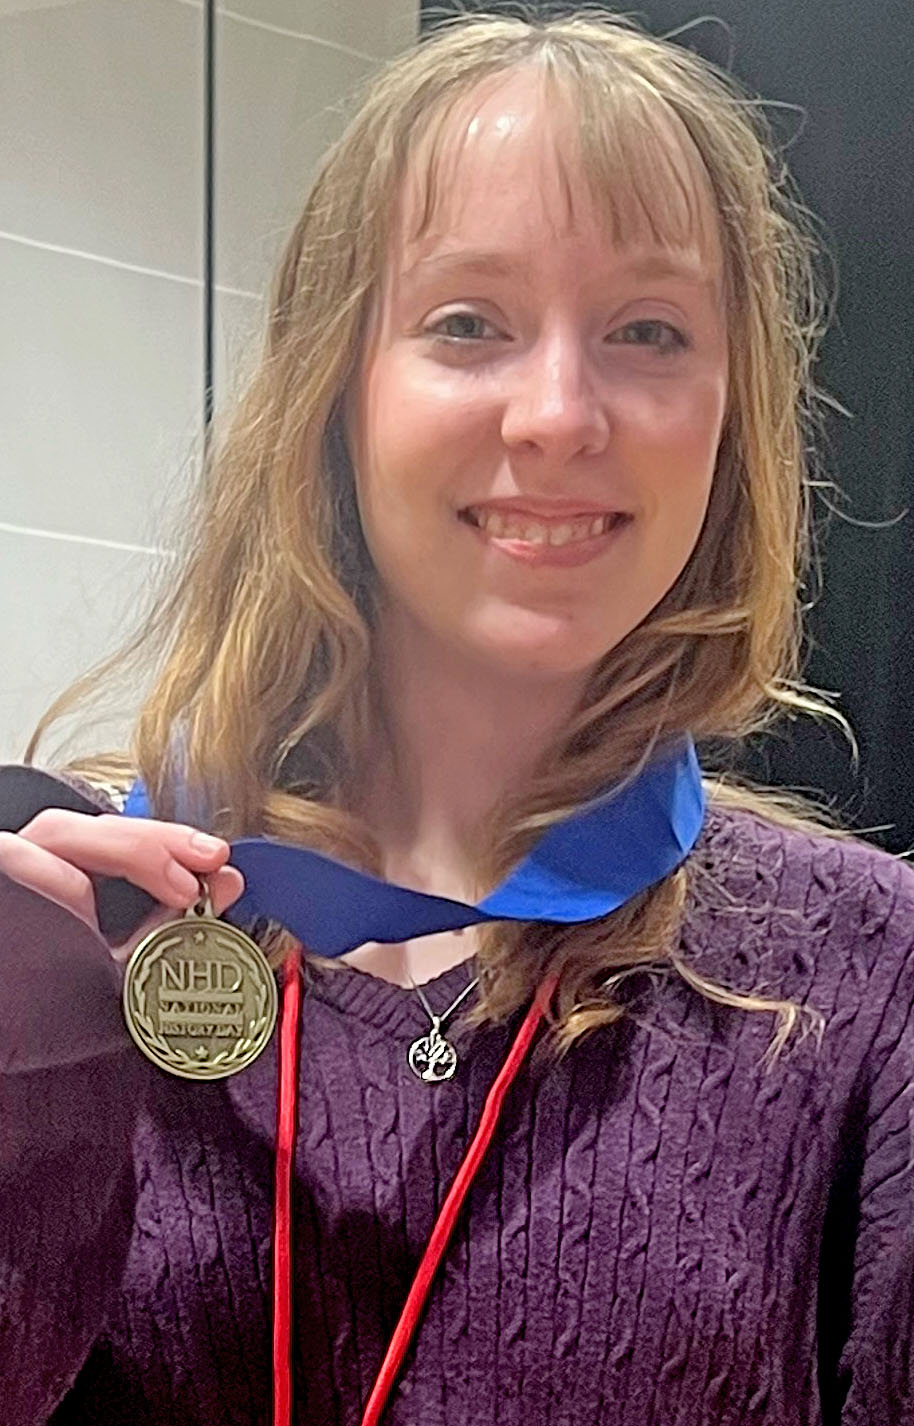 Mae Cohen holds her National History Day medal